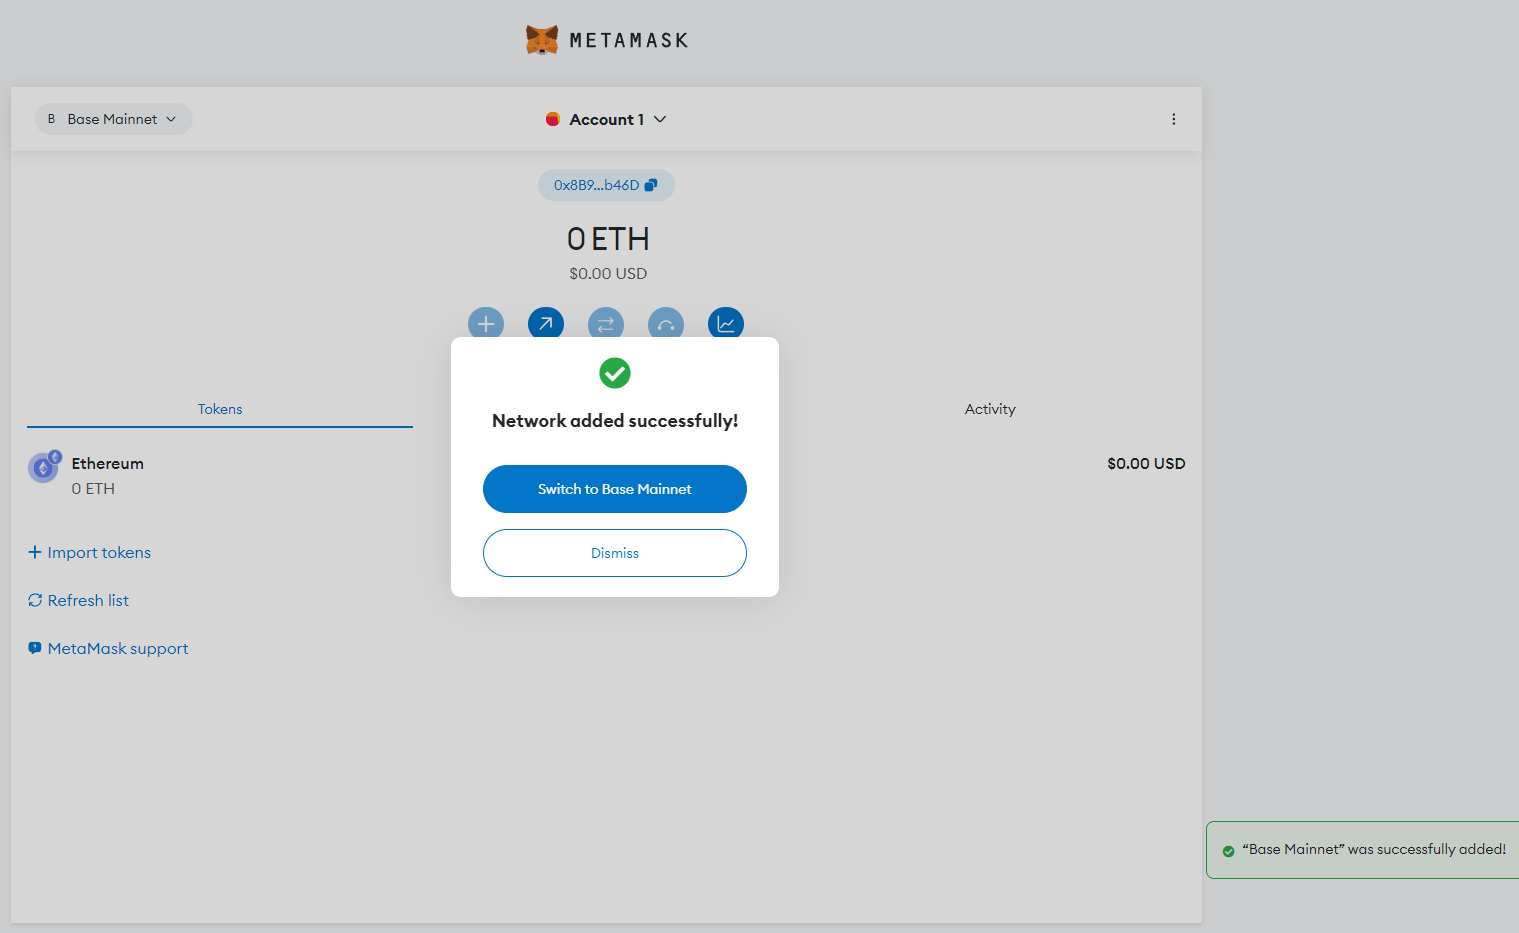 Metamask asking to switch to Base Mainnet network